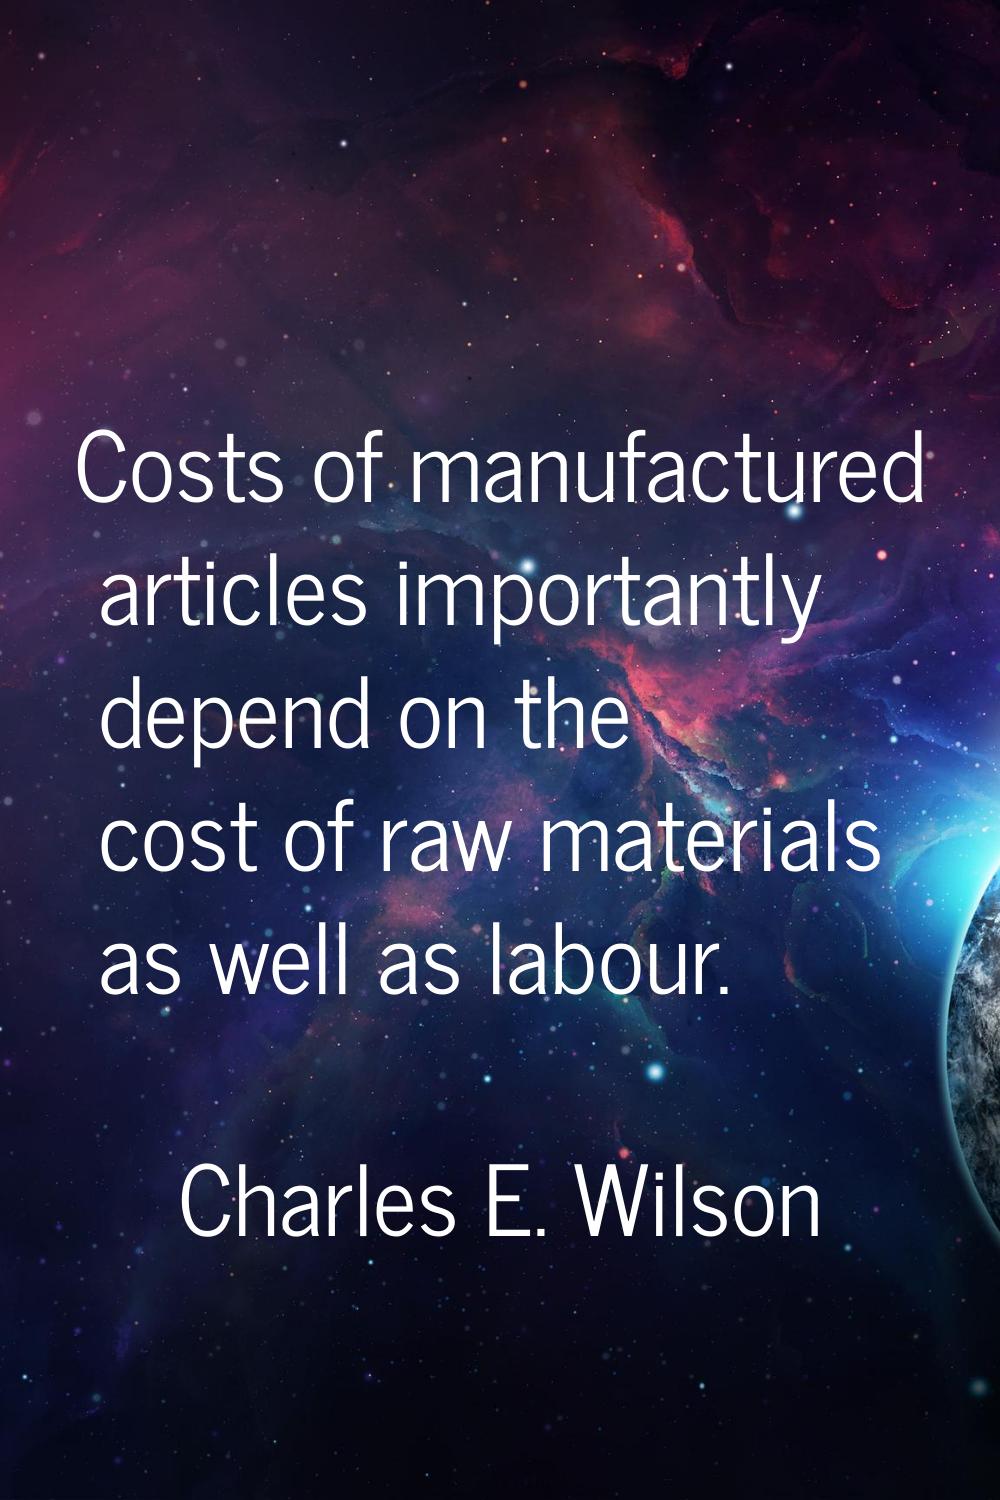 Costs of manufactured articles importantly depend on the cost of raw materials as well as labour.